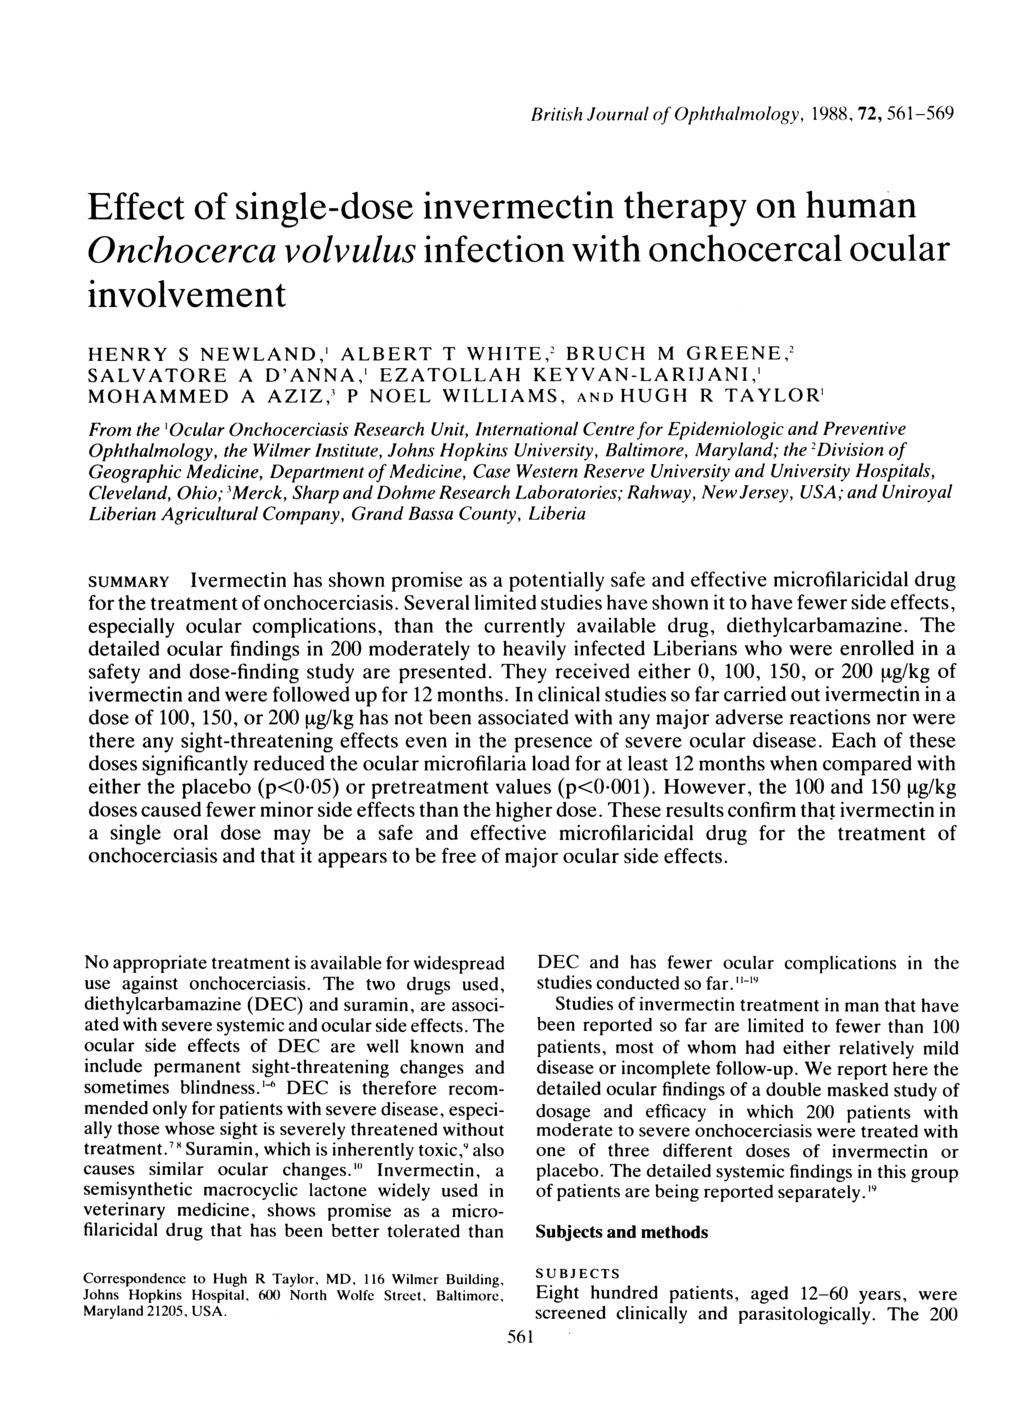 British Journal of Ophthalmology, 1988, 72, 561-569 Effect of single-dose invermectin therapy on human Onchocerca volvulus infection with onchocercal ocular involvement HENRY S NEWLAND,' ALBERT T